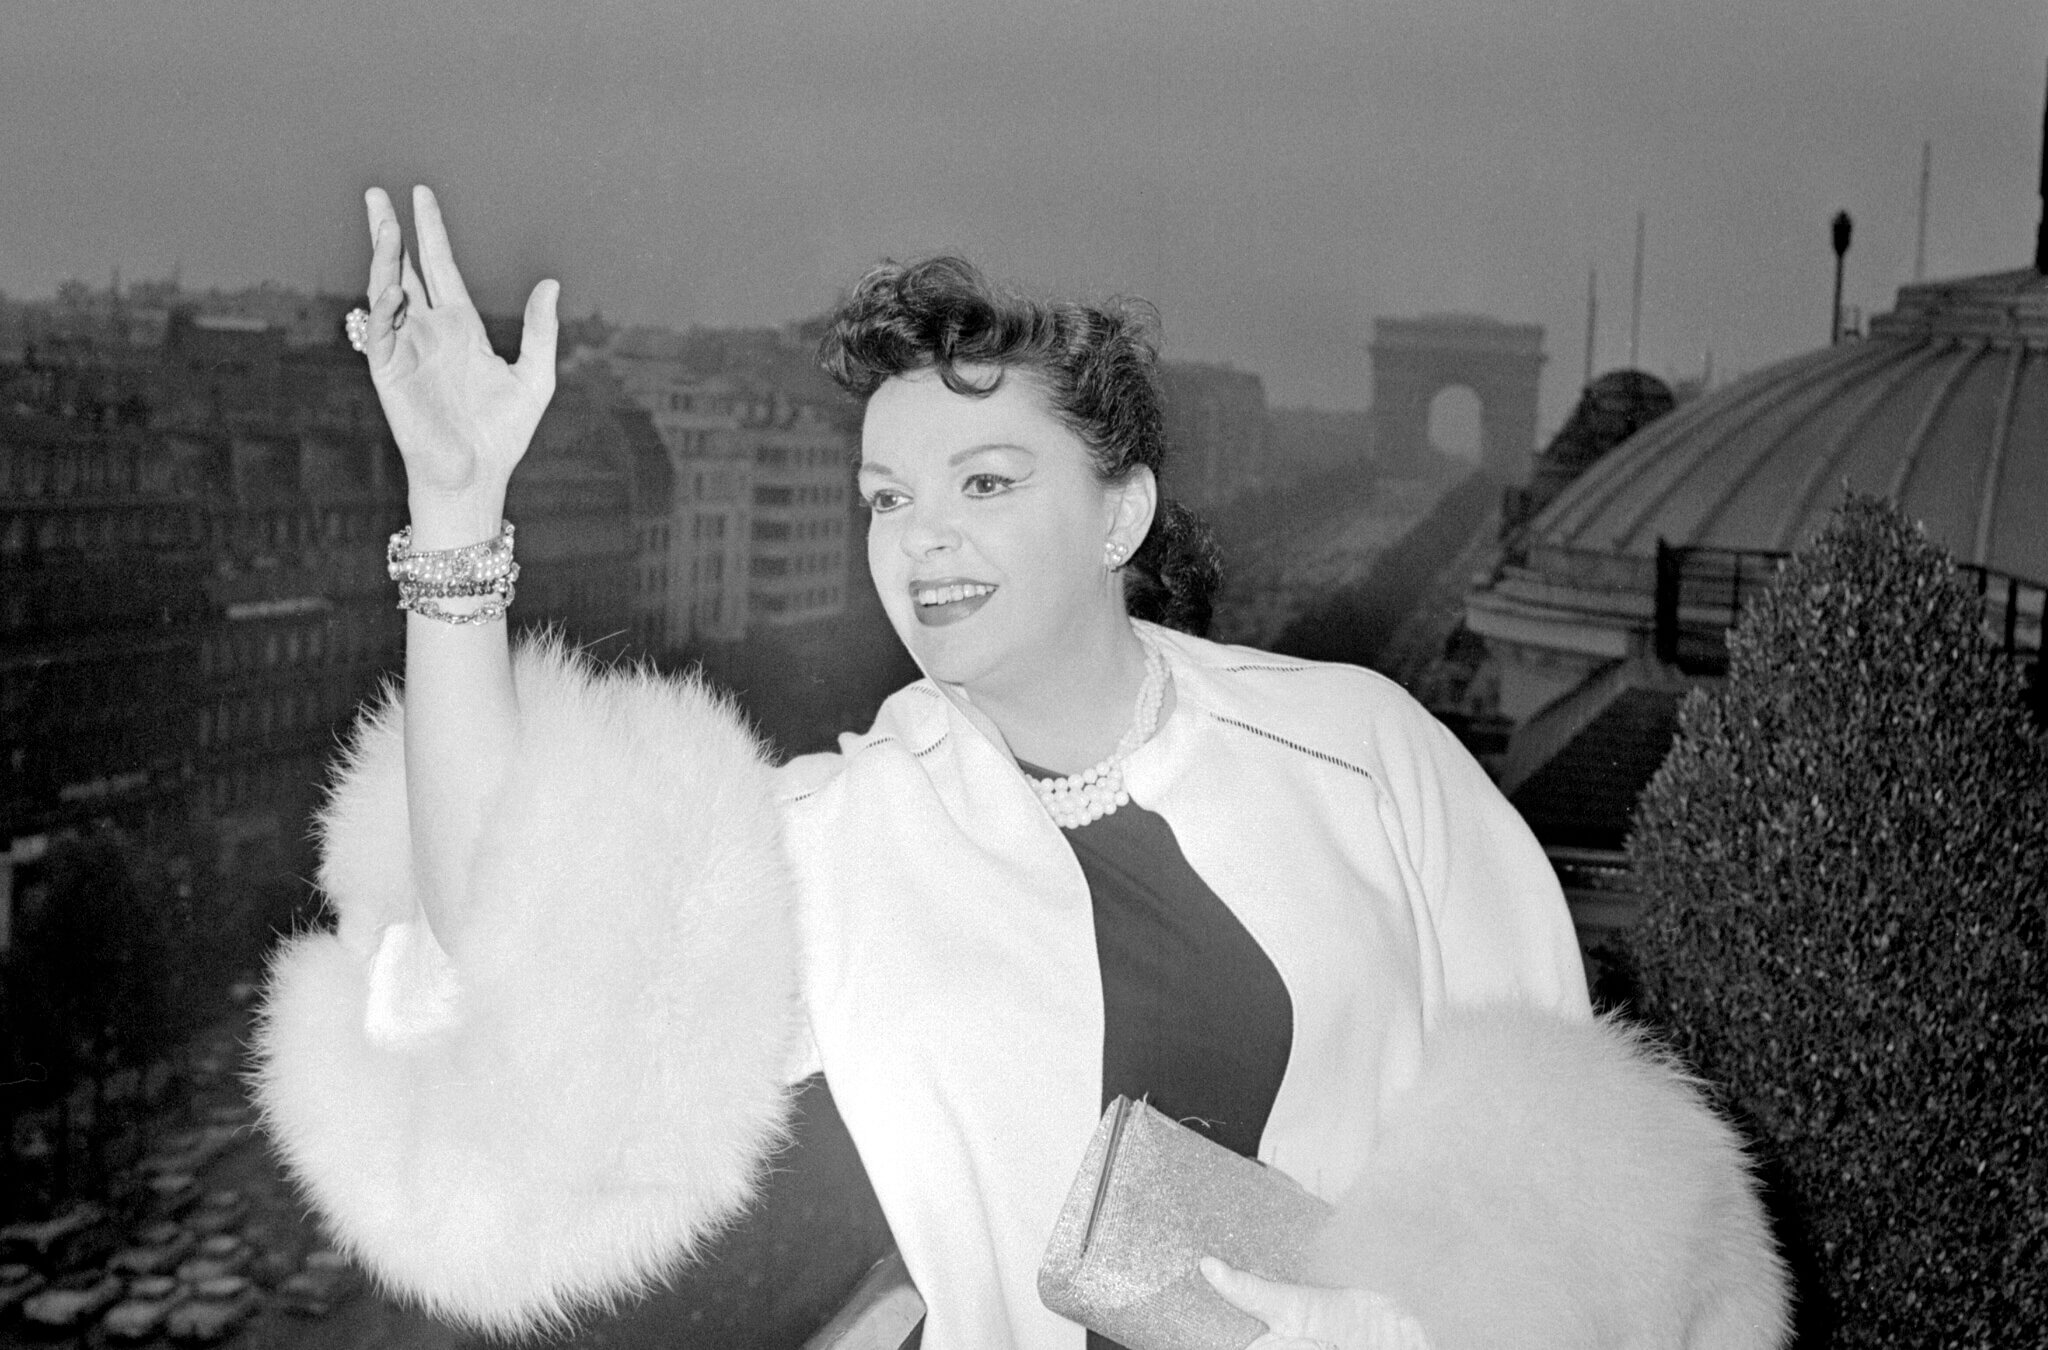 Judy Garland would have turned 100 on June 10, 2022. She is seen here in Paris, 1960.